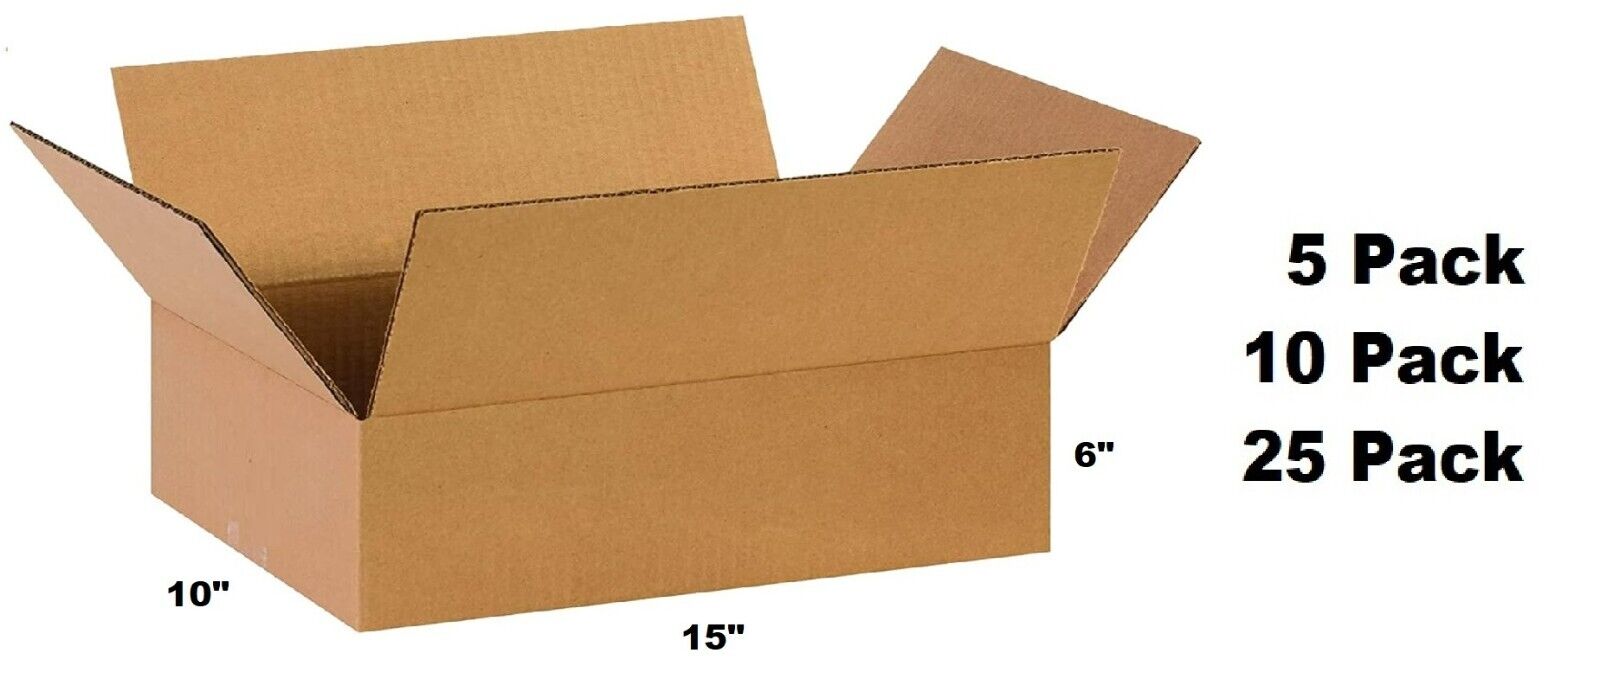 Lot of 15x10x6 Cardboard Paper Mailing Packing Shipping Box Corrugated Carton